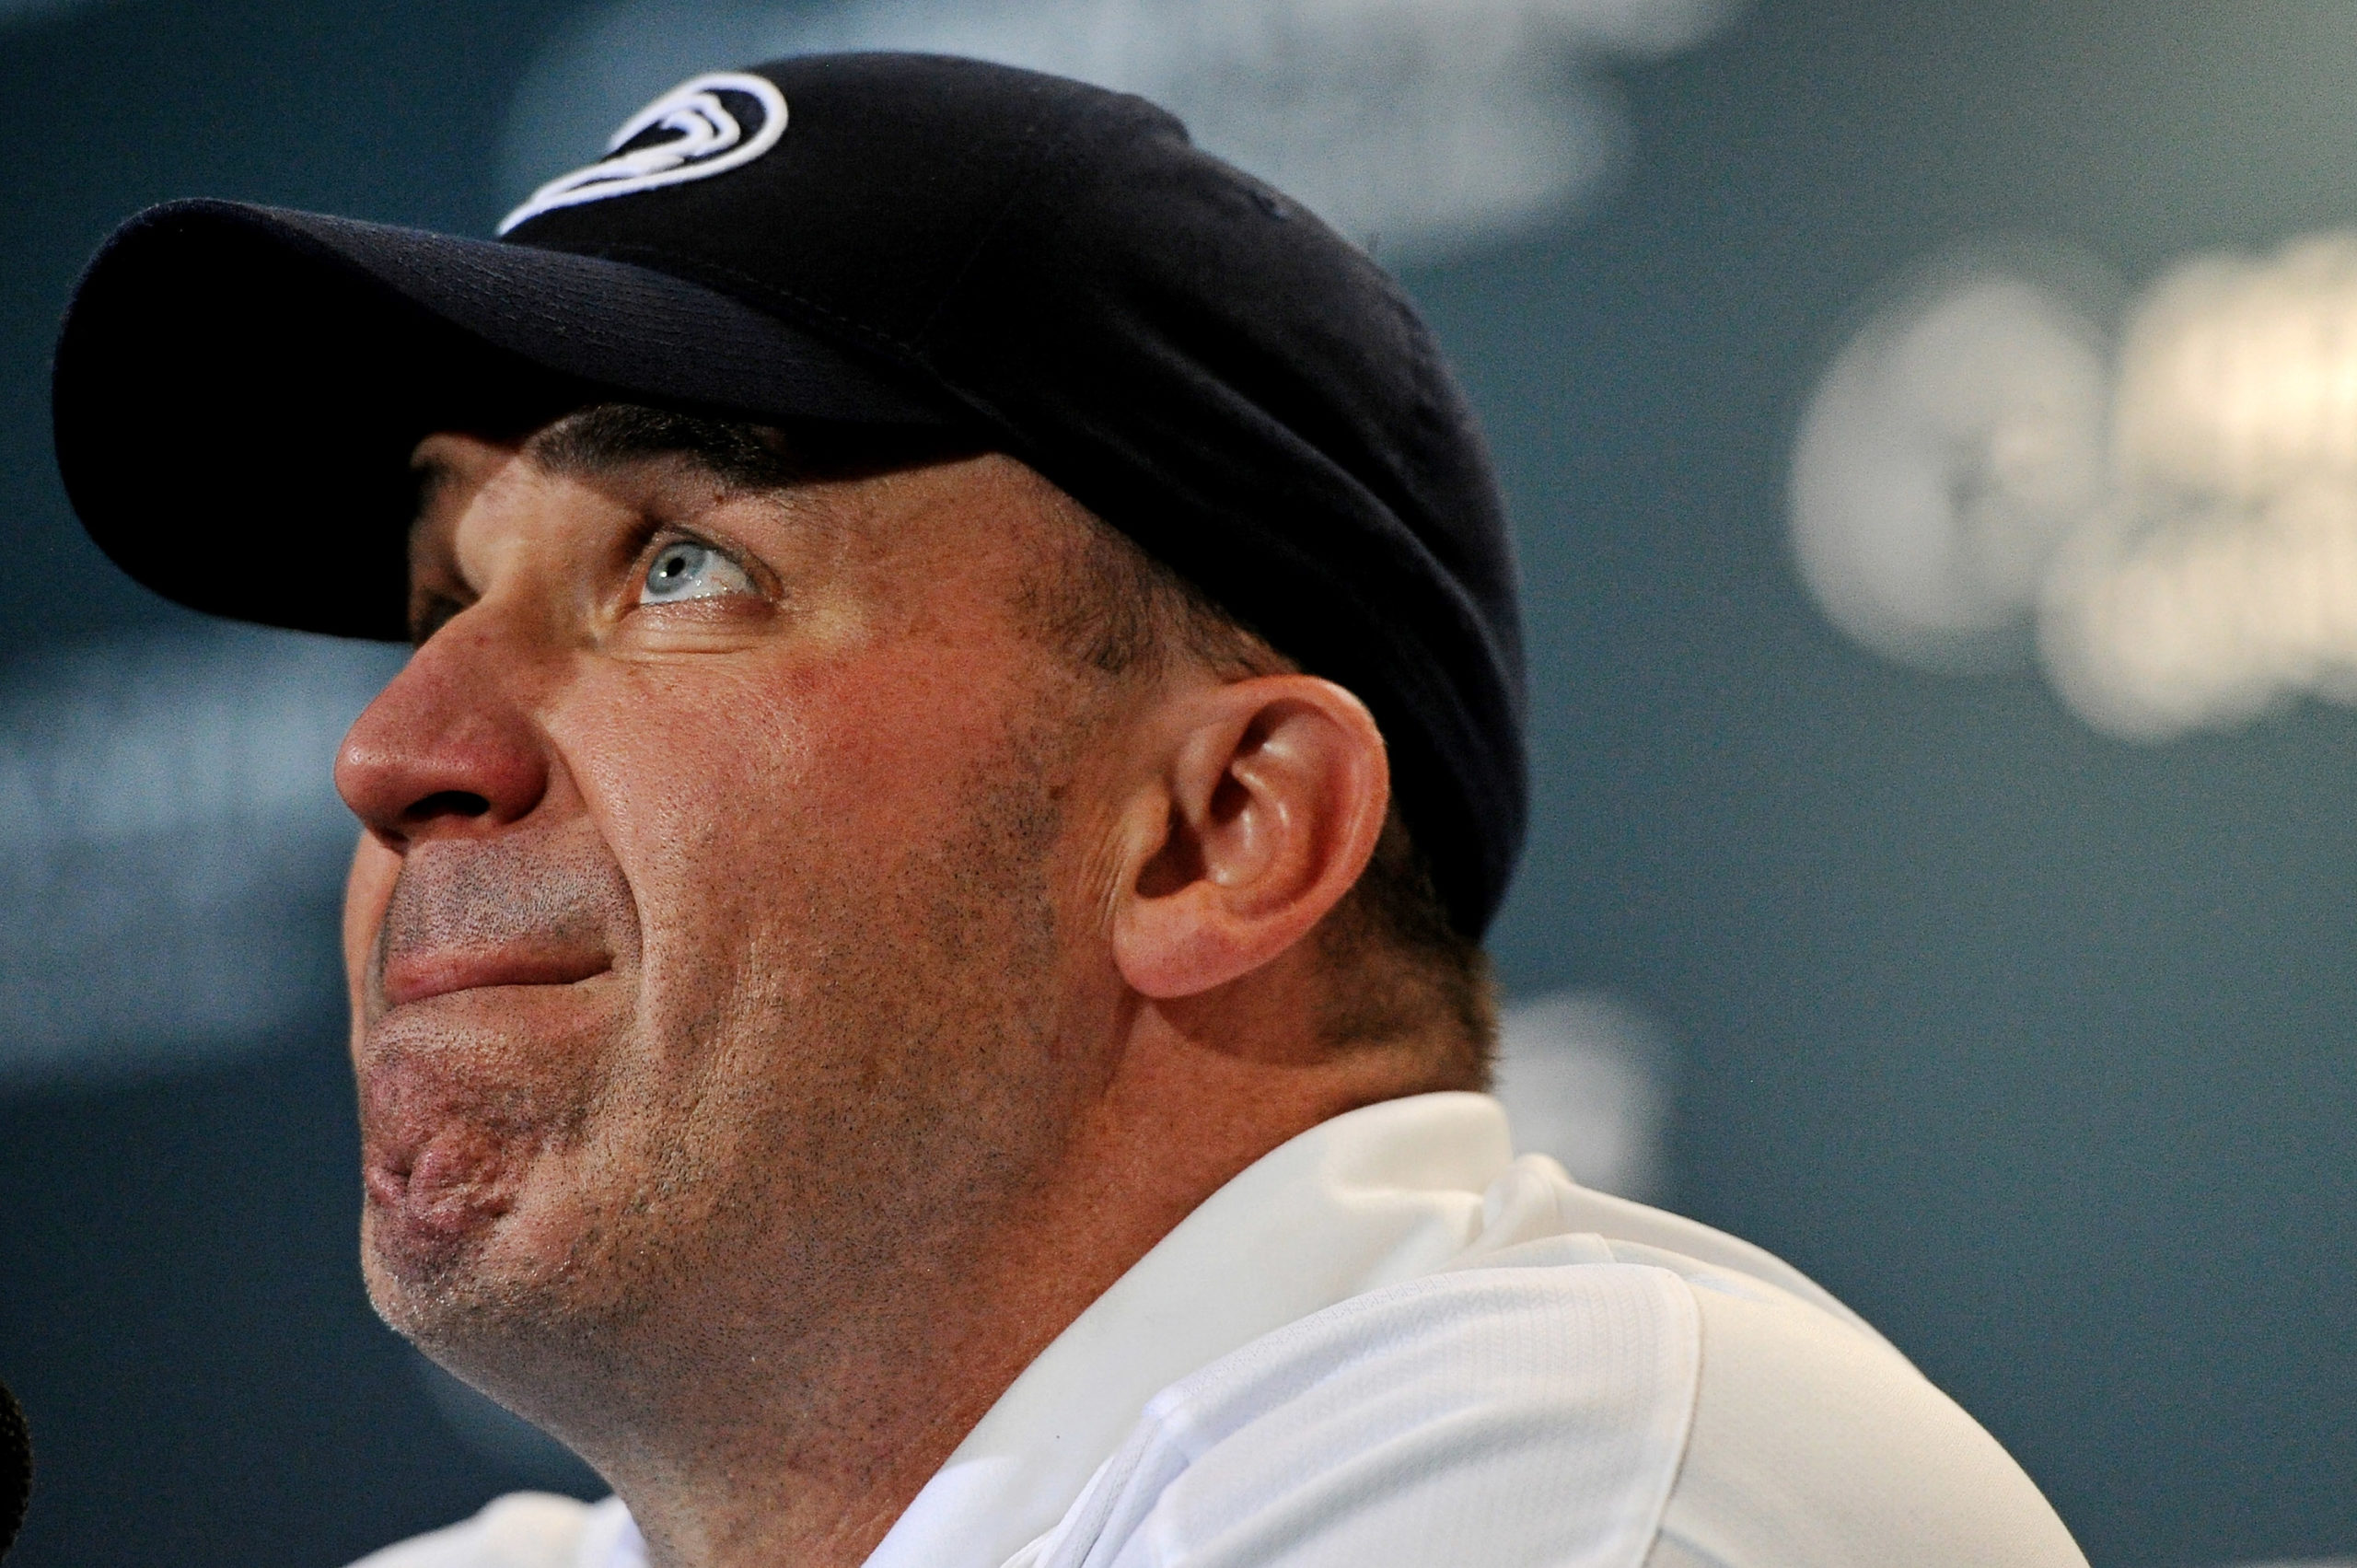 STATE COLLEGE, PA - SEPTEMBER 01: Head coach Bill O'Brien of the Penn State Nittany Lions speaks to the media after losing to the Ohio Bobcats at Beaver Stadium on September 1, 2012 in State College, Pennsylvania. The Bobcats won 24-14. Patrick Smith/Getty Images